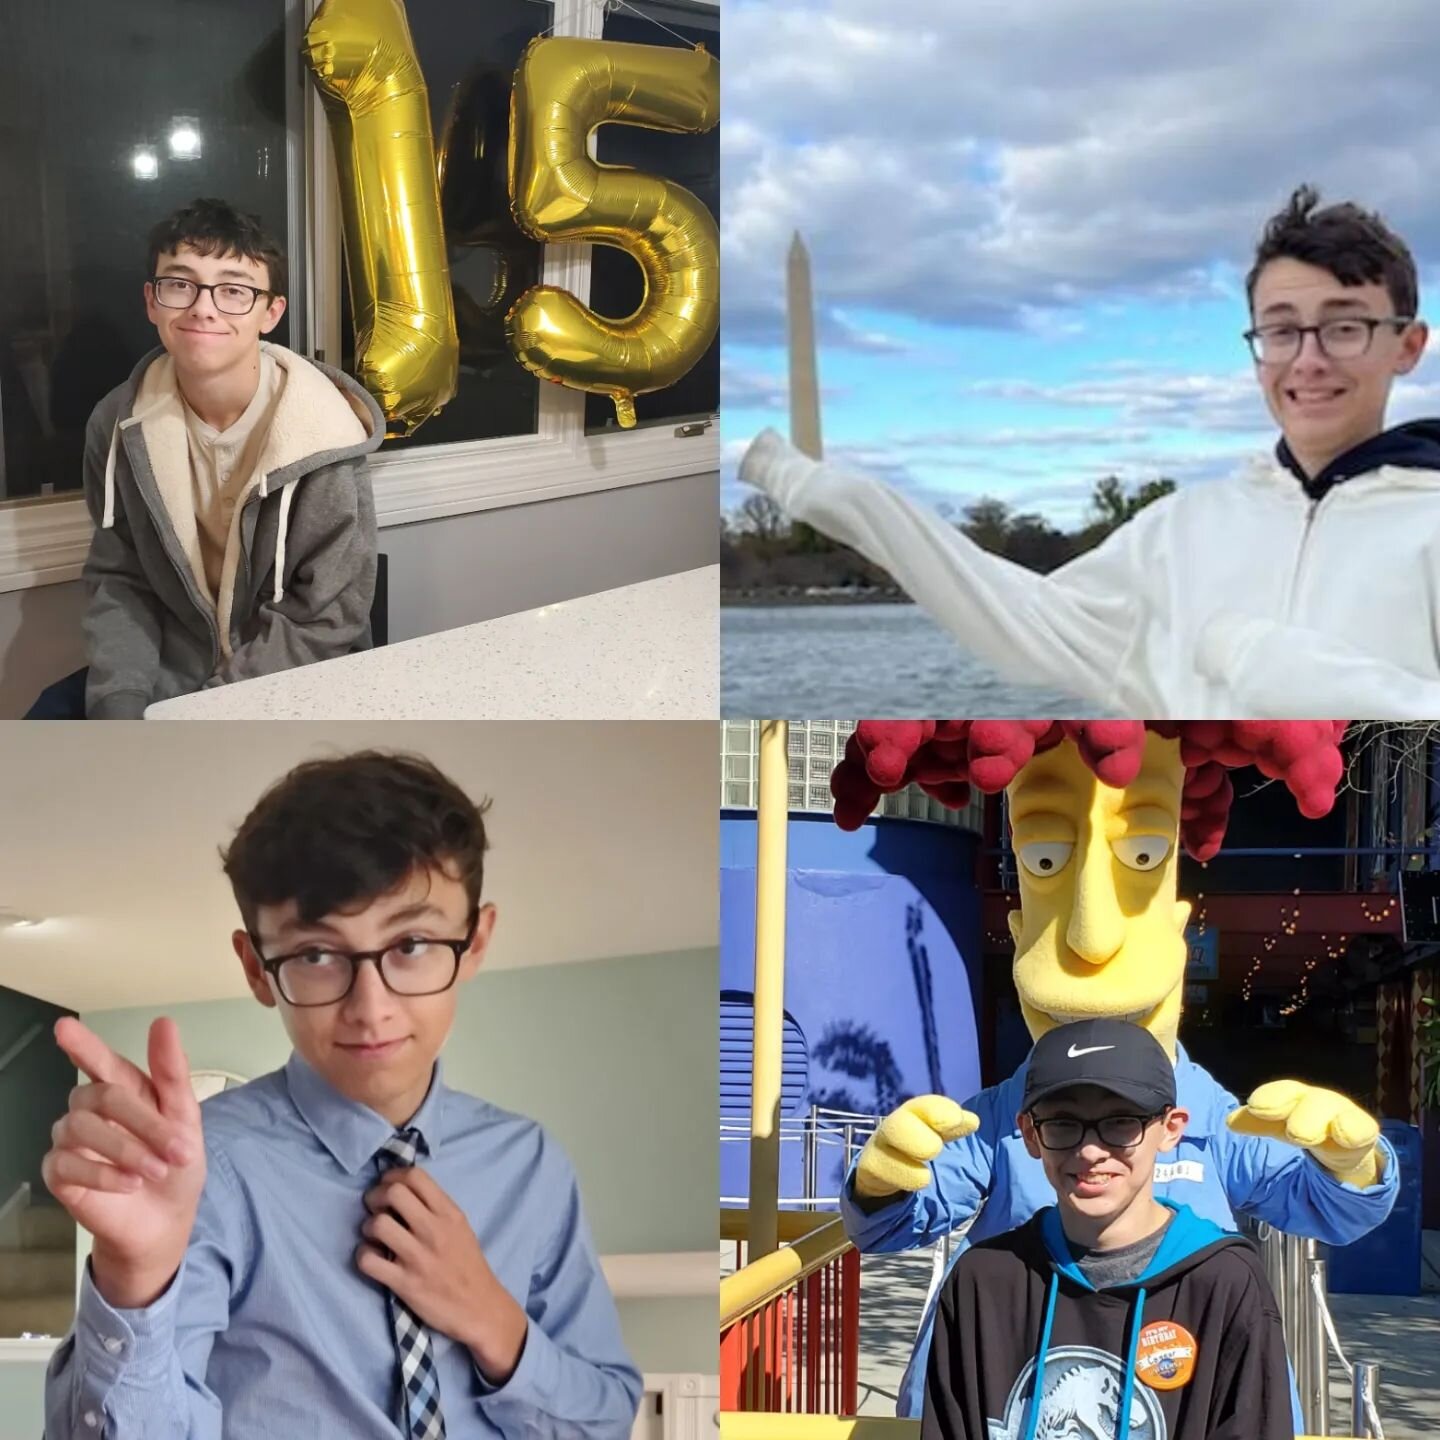 Happy Birthday Connor! I can't believe he is 15 years old! He is so funny, talented and caring.